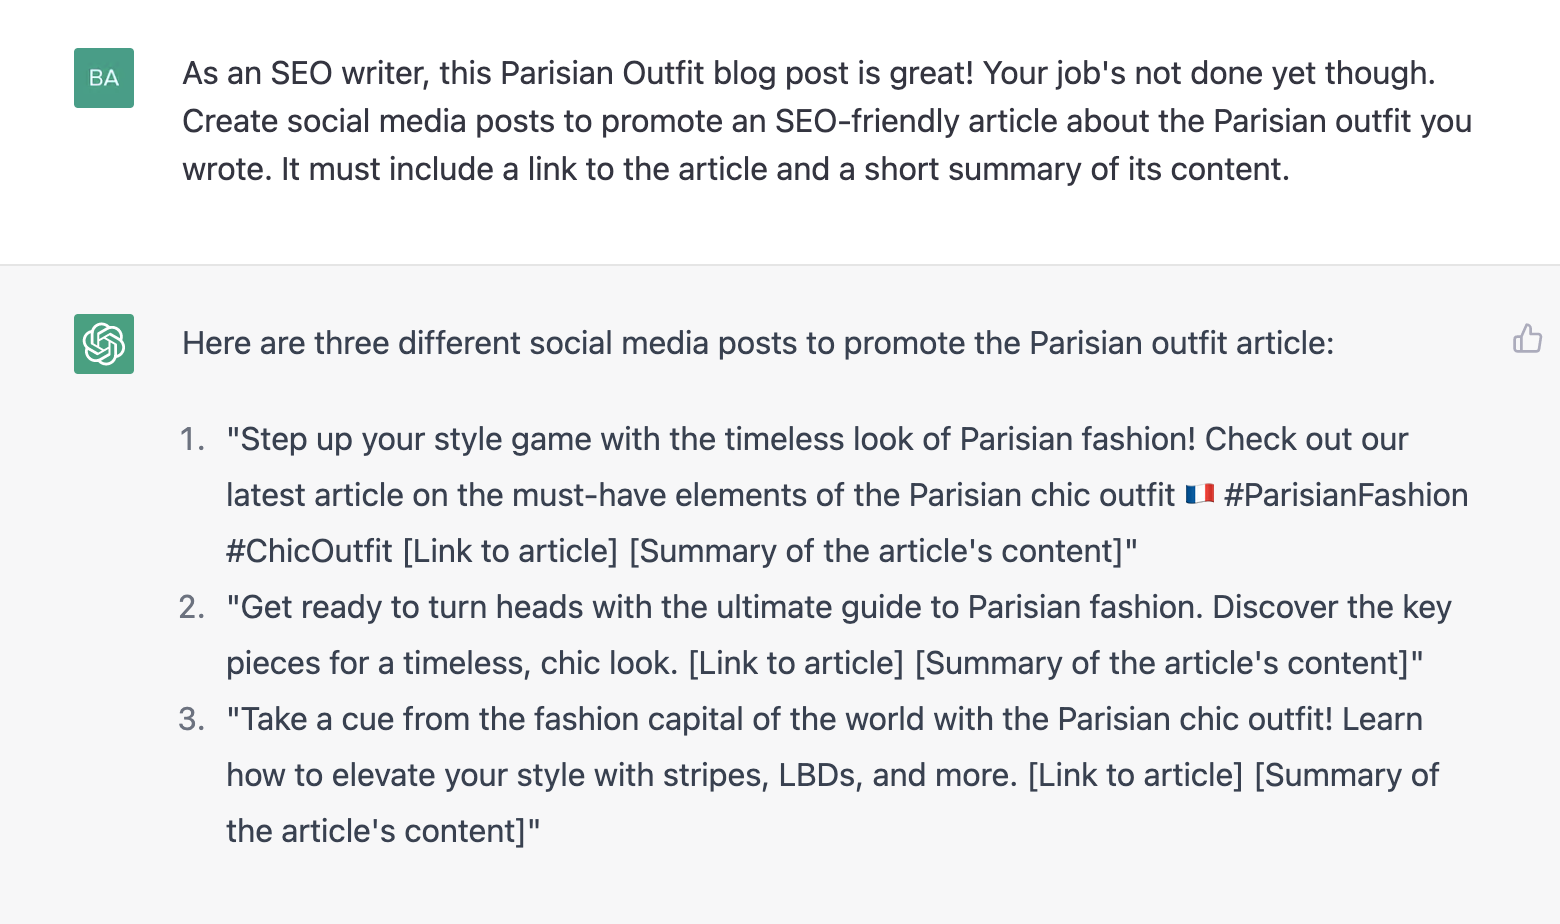 ChatGPT prompt about creating social media posts to promote an SEO friendly article about the Parisian outfit